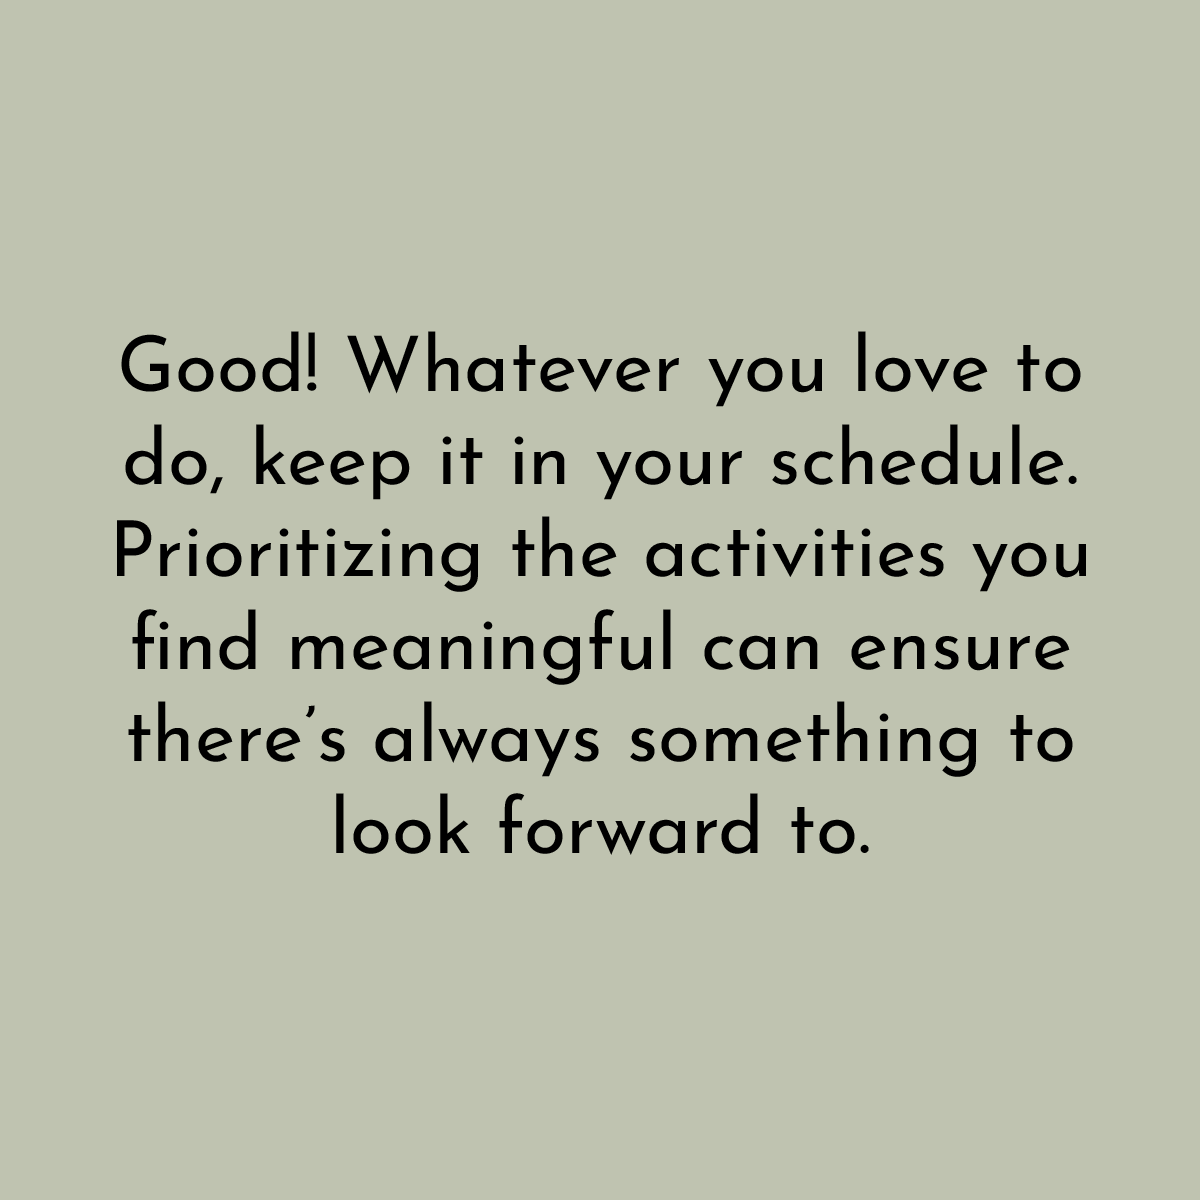 Good! Whatever you love to do, keep it in your schedule. Prioritizing the activities you find meaningful can ensure there's always something to look forward to.